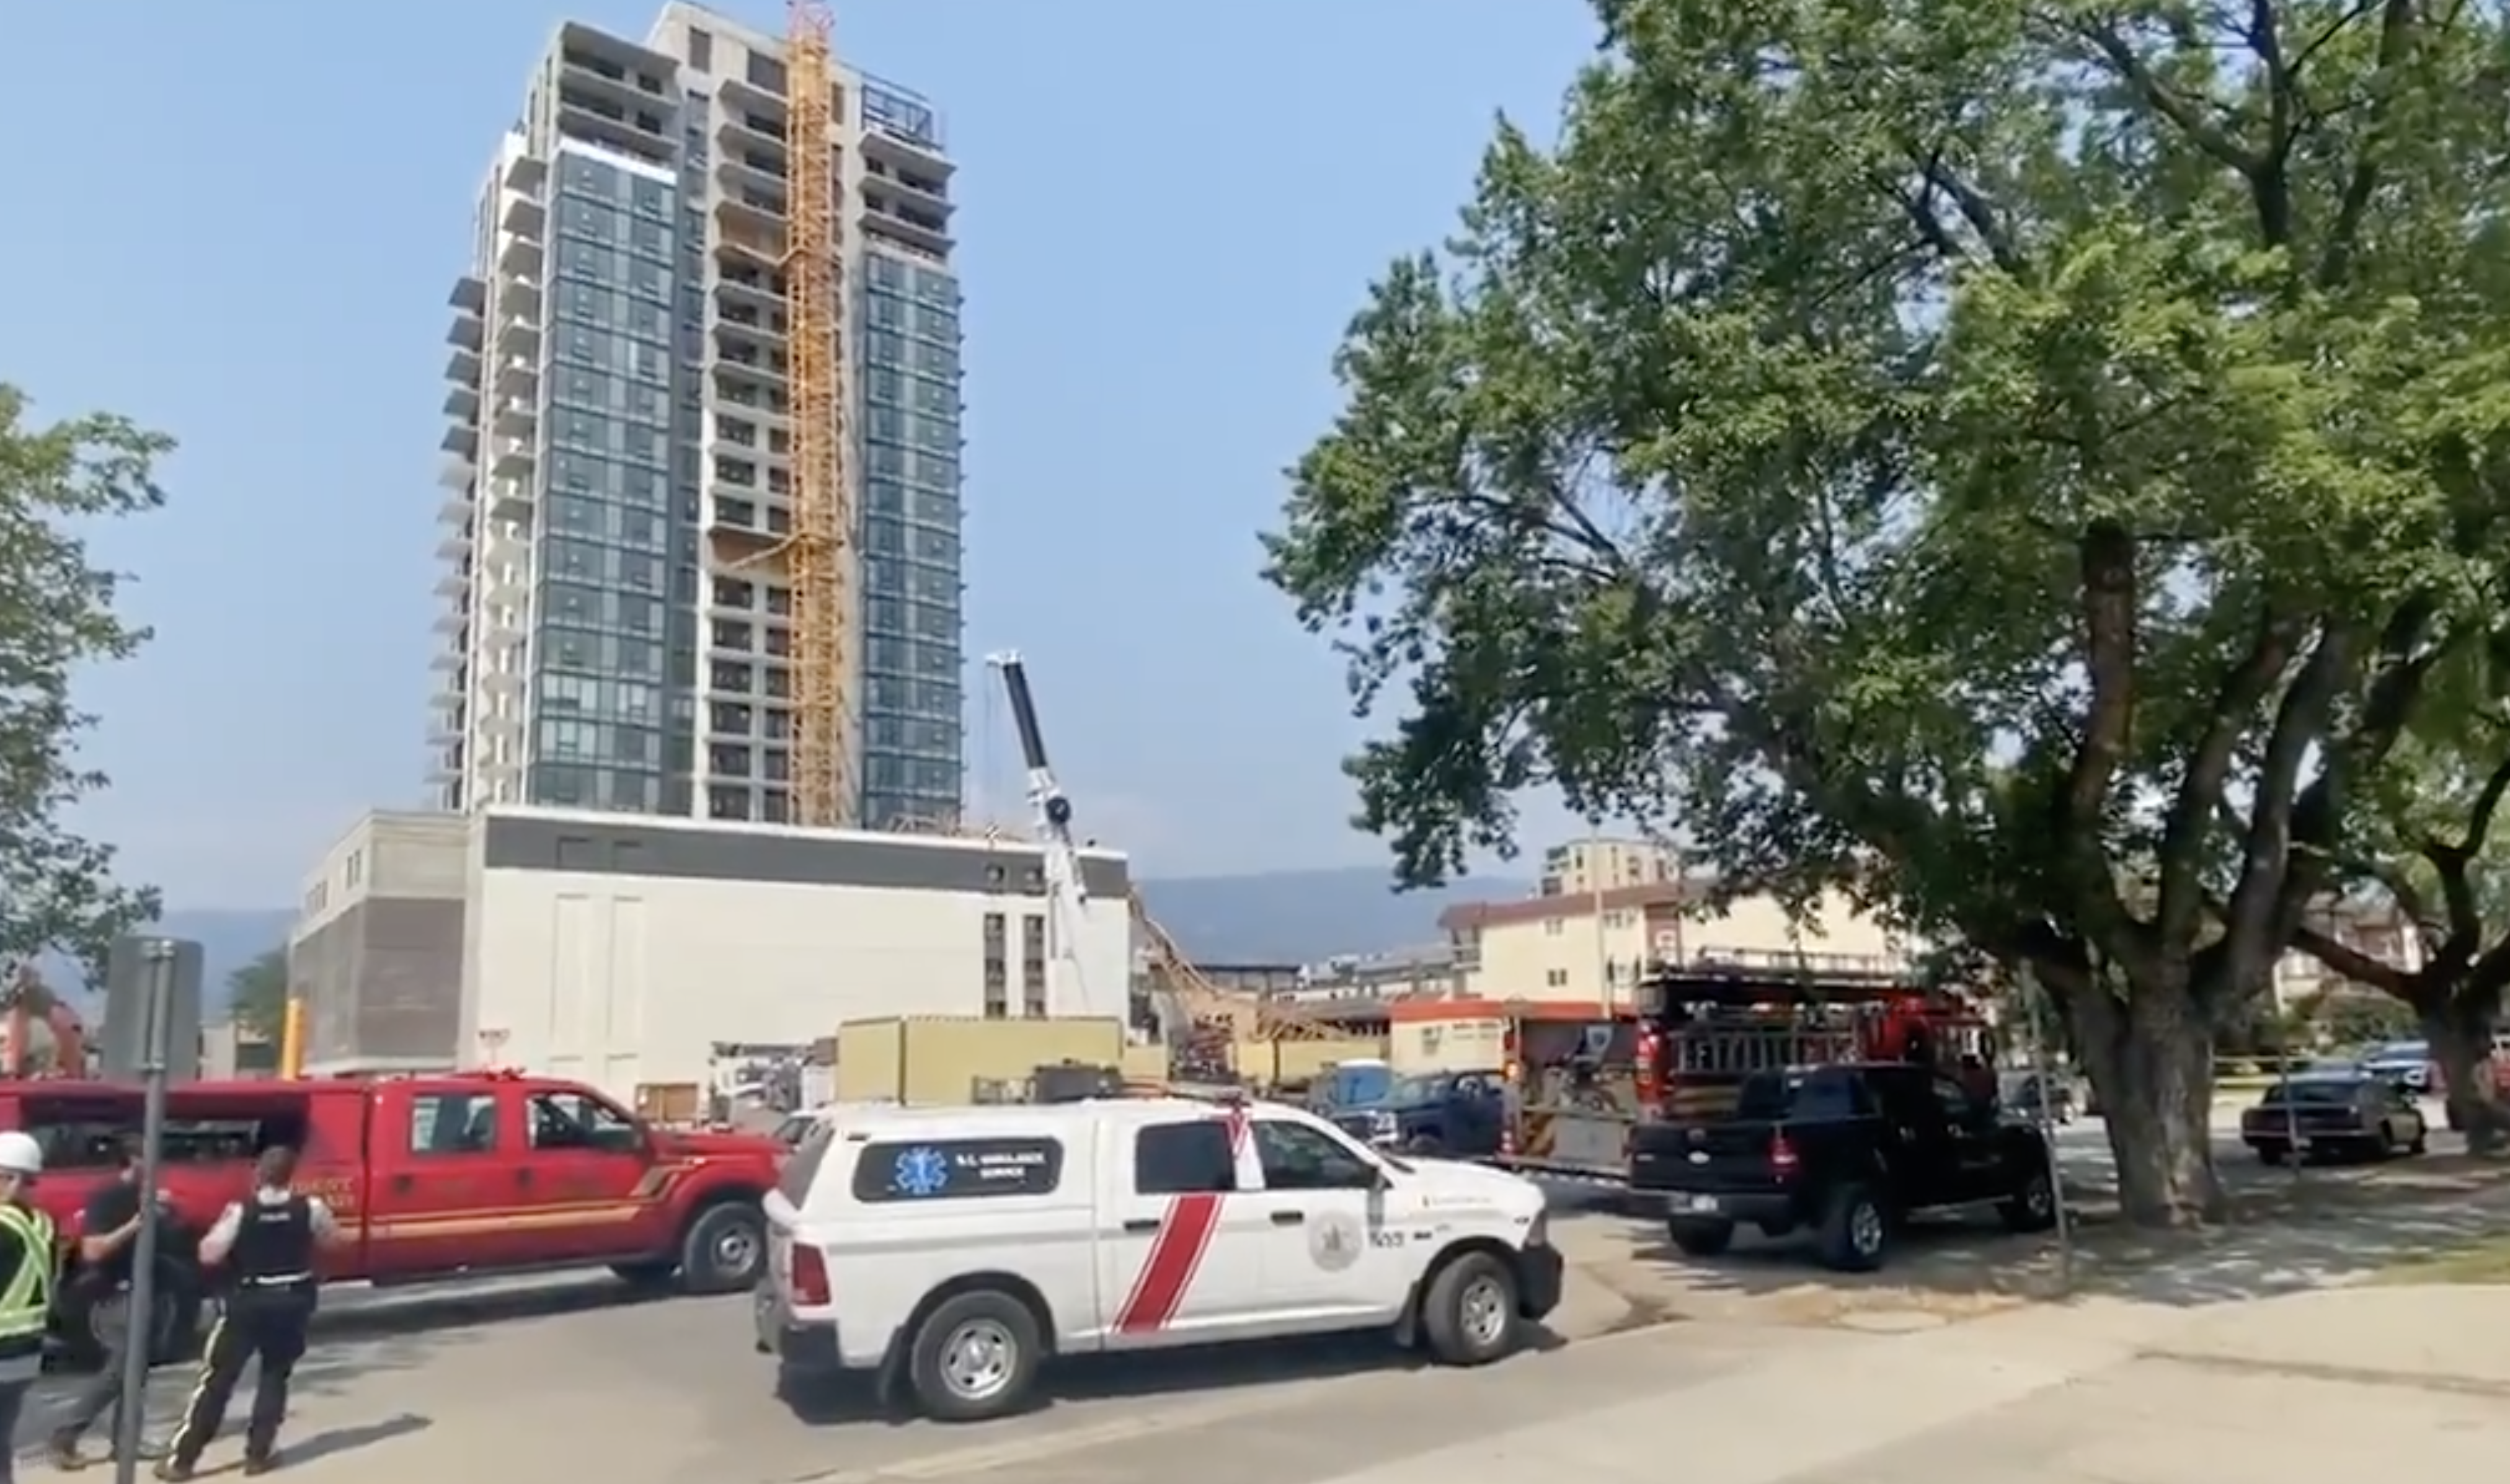 Construction crane collapses in Kelowna, one person dead